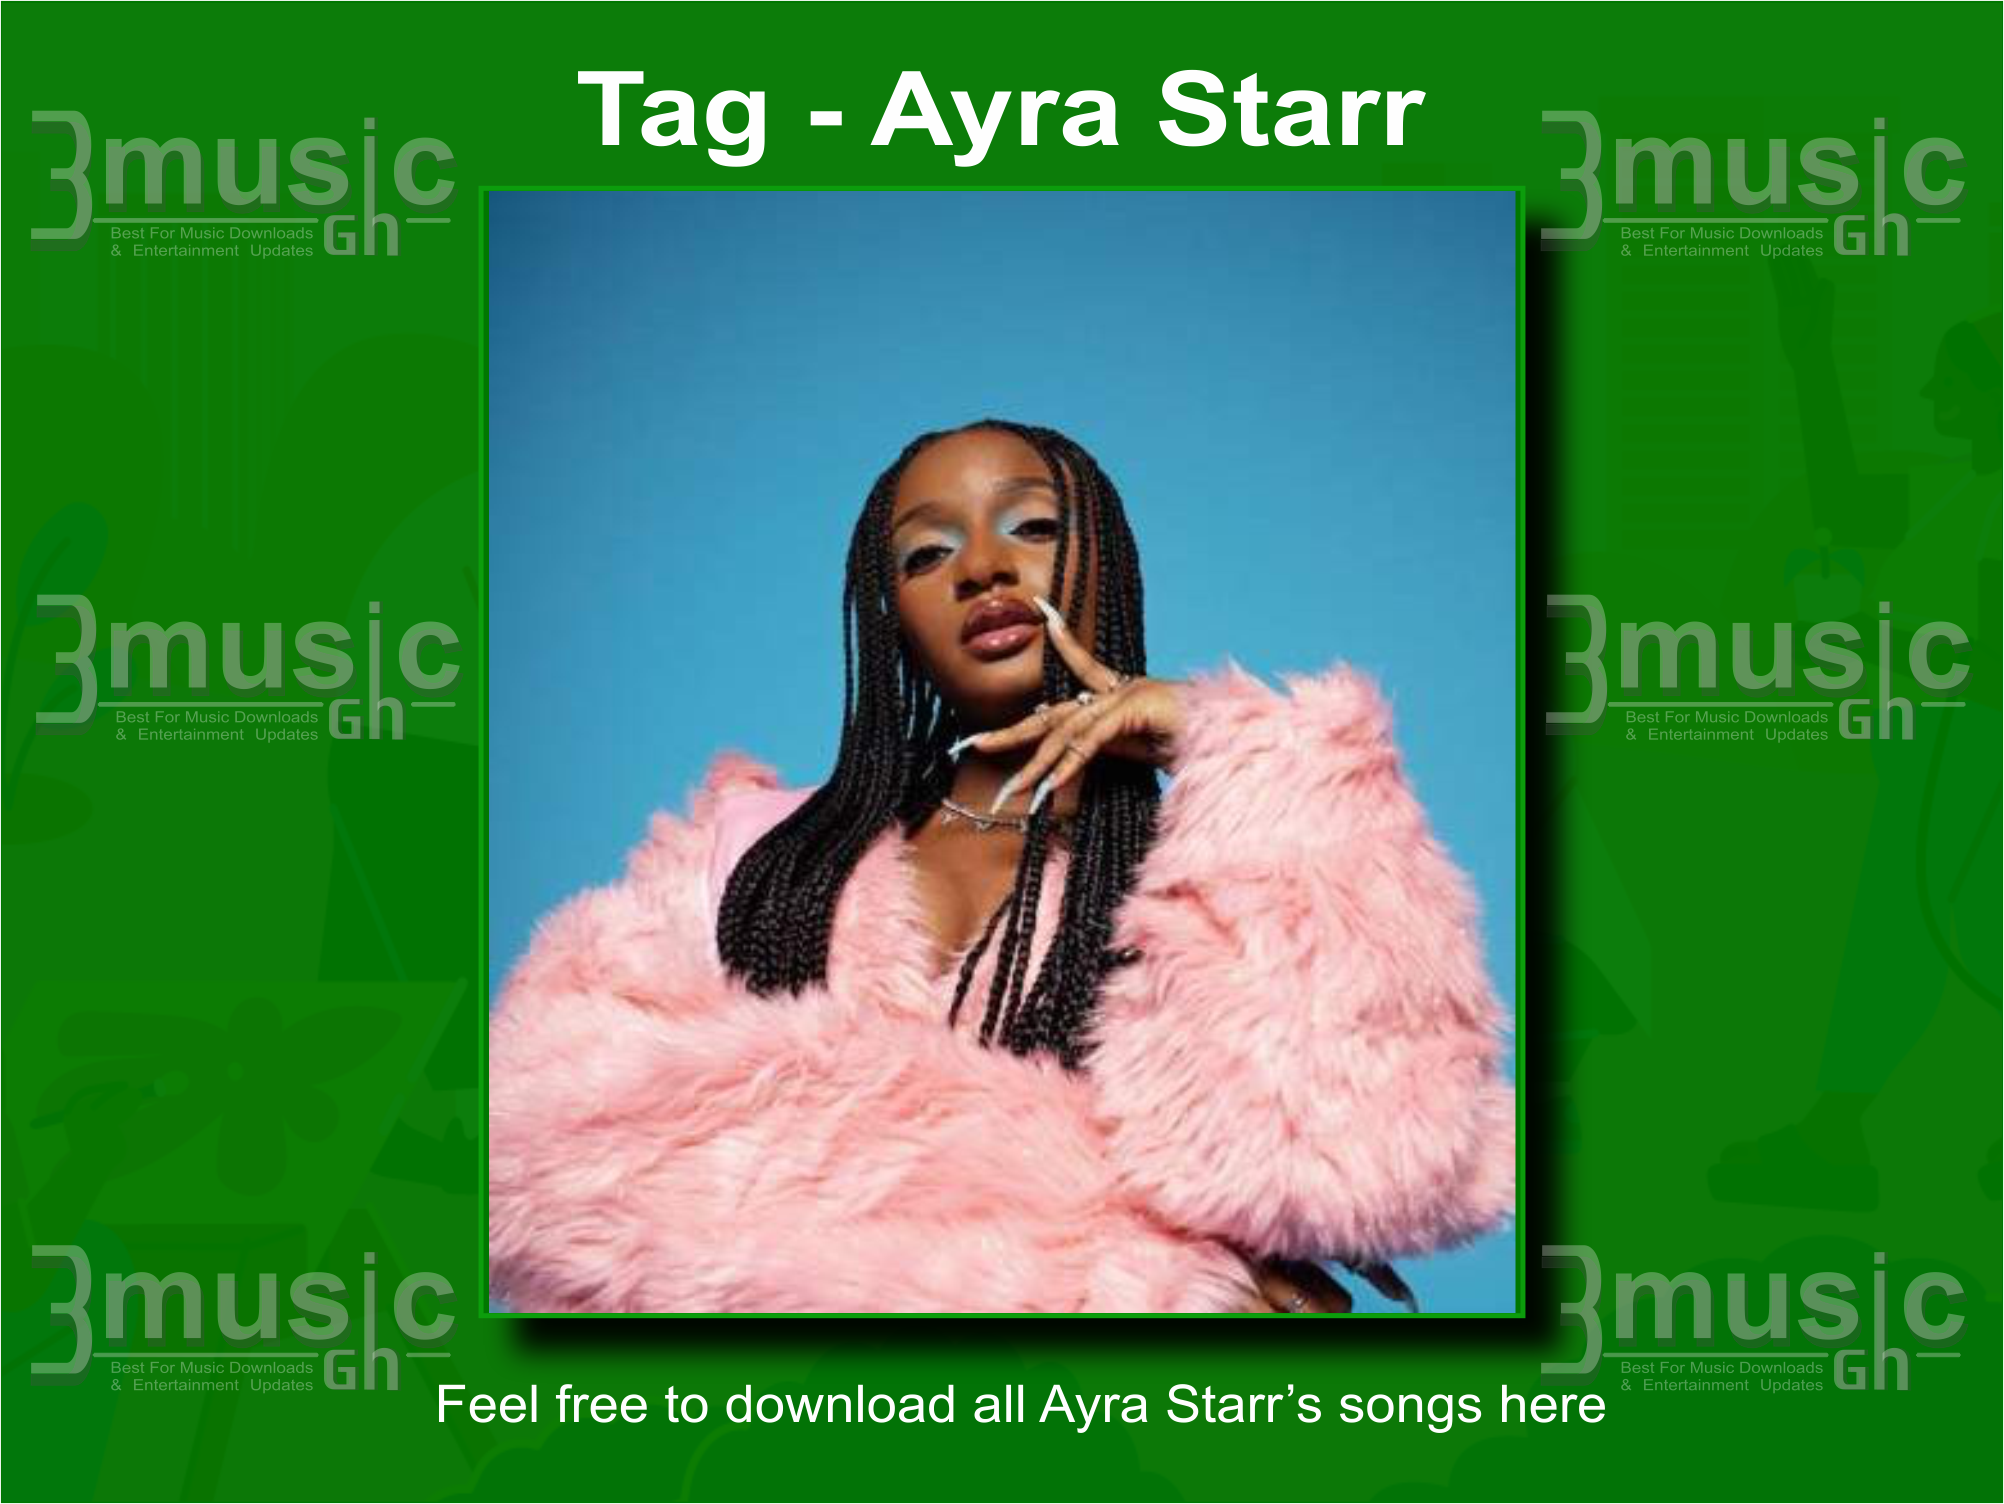 Ayra Starr songs all download_ 3musicgh.com